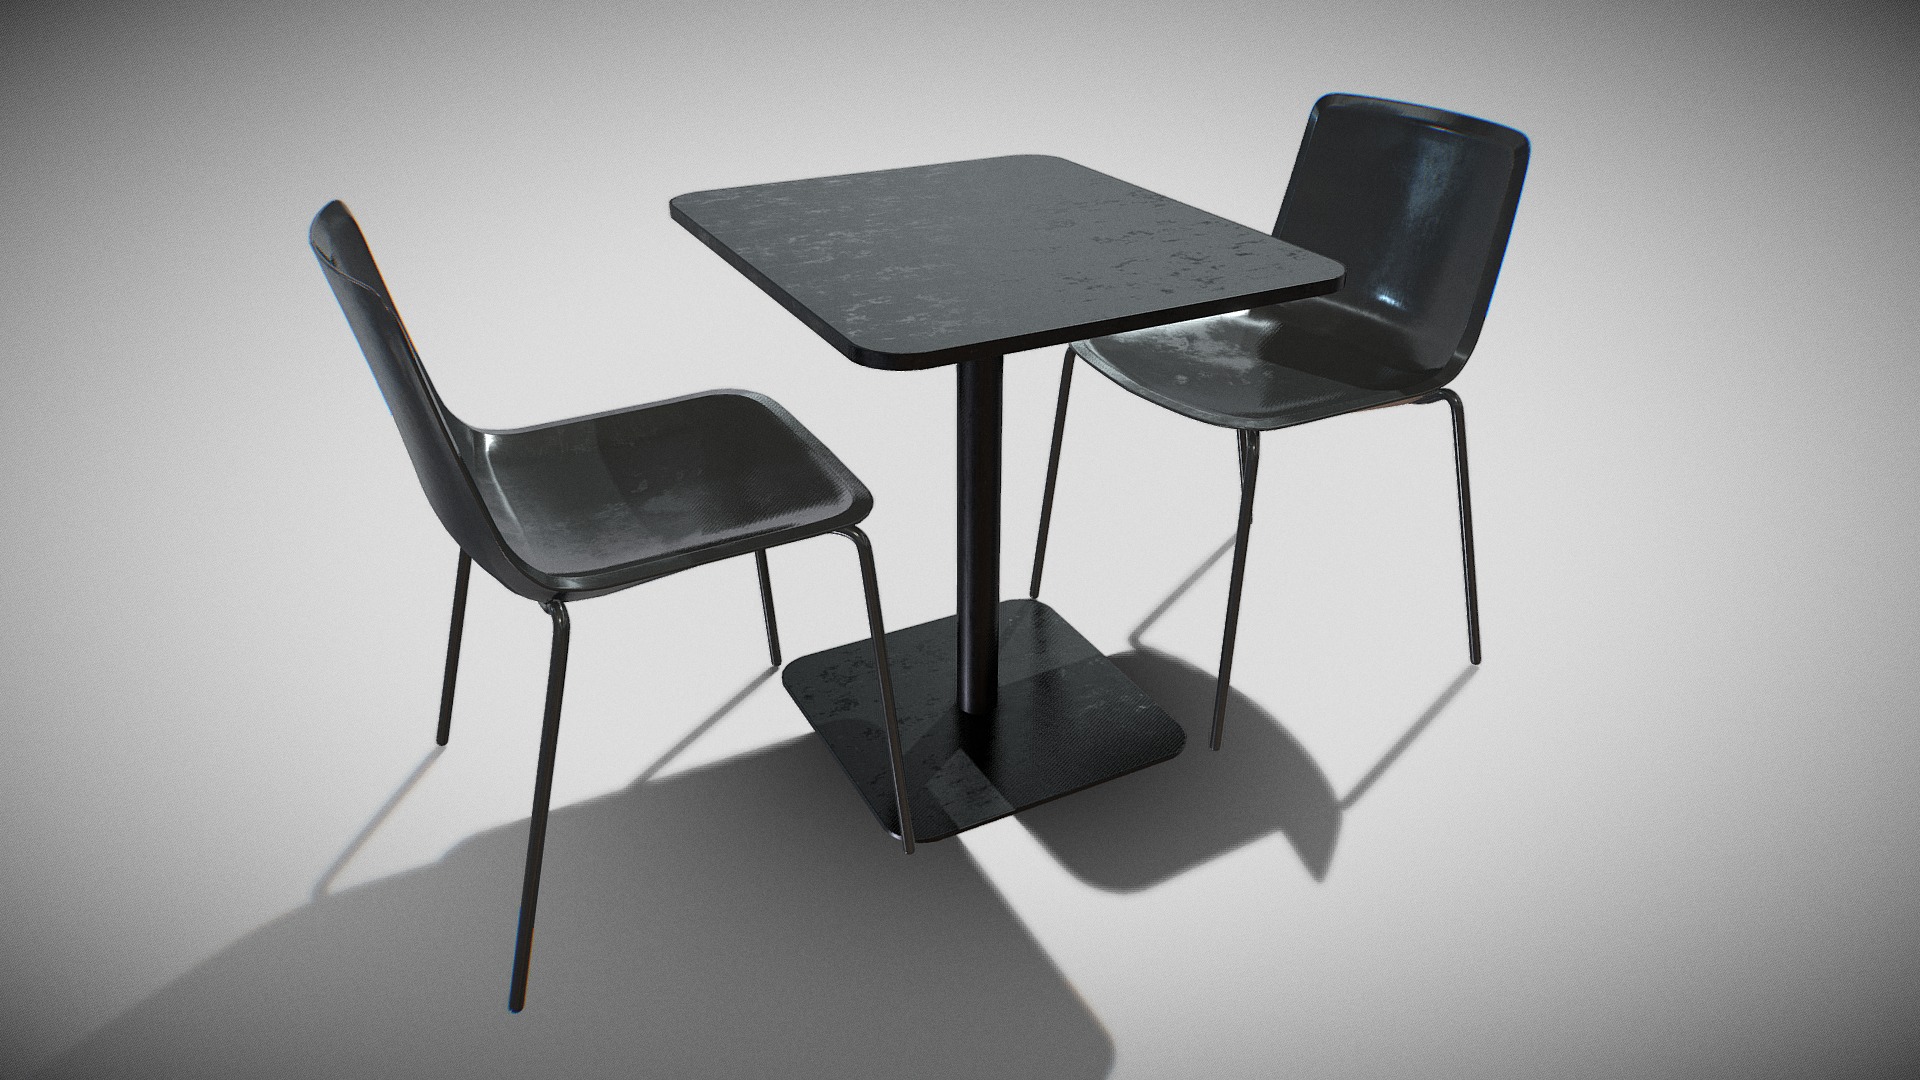 3D model Mesa CafeTable-Set v-01 - This is a 3D model of the Mesa CafeTable-Set v-01. The 3D model is about a pair of black chairs.